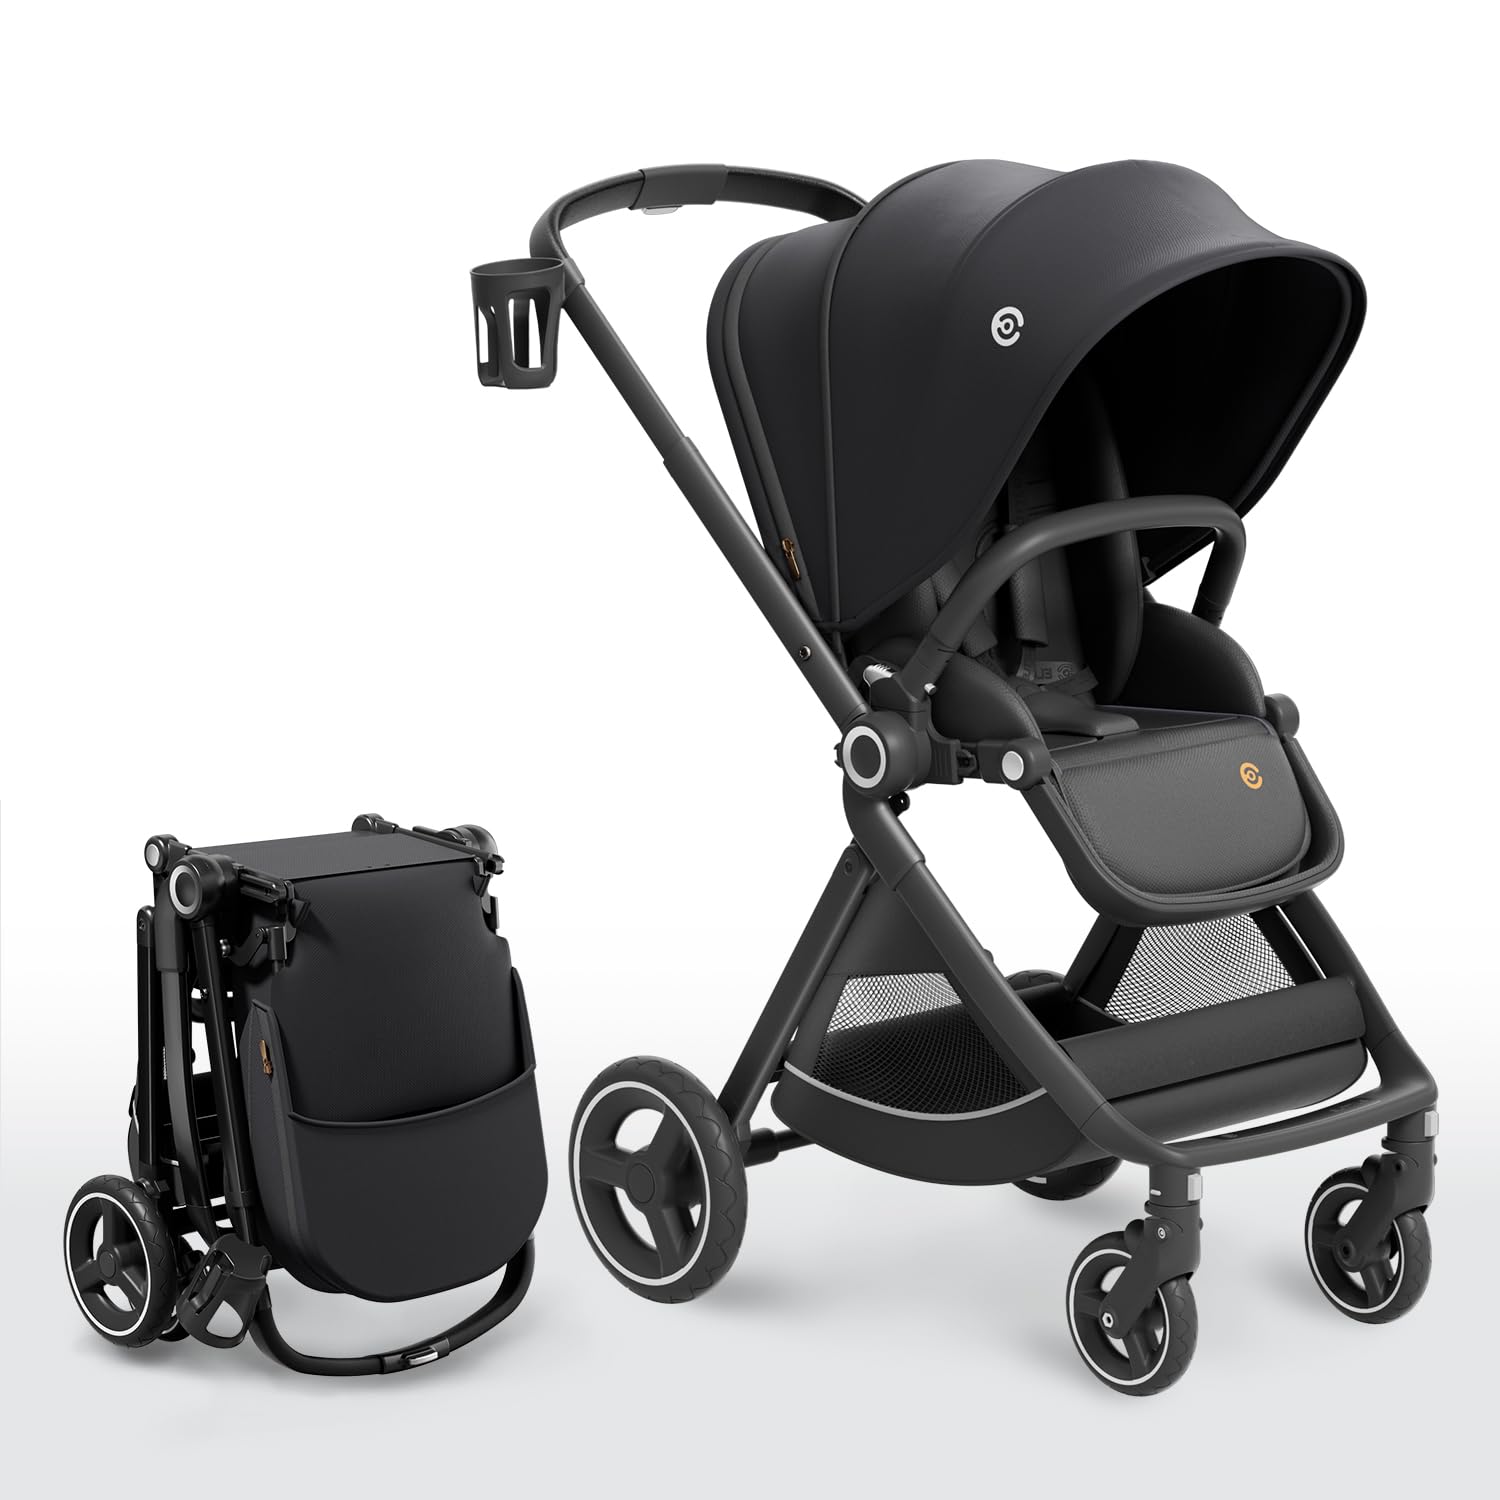 Reversible Baby Stroller Review